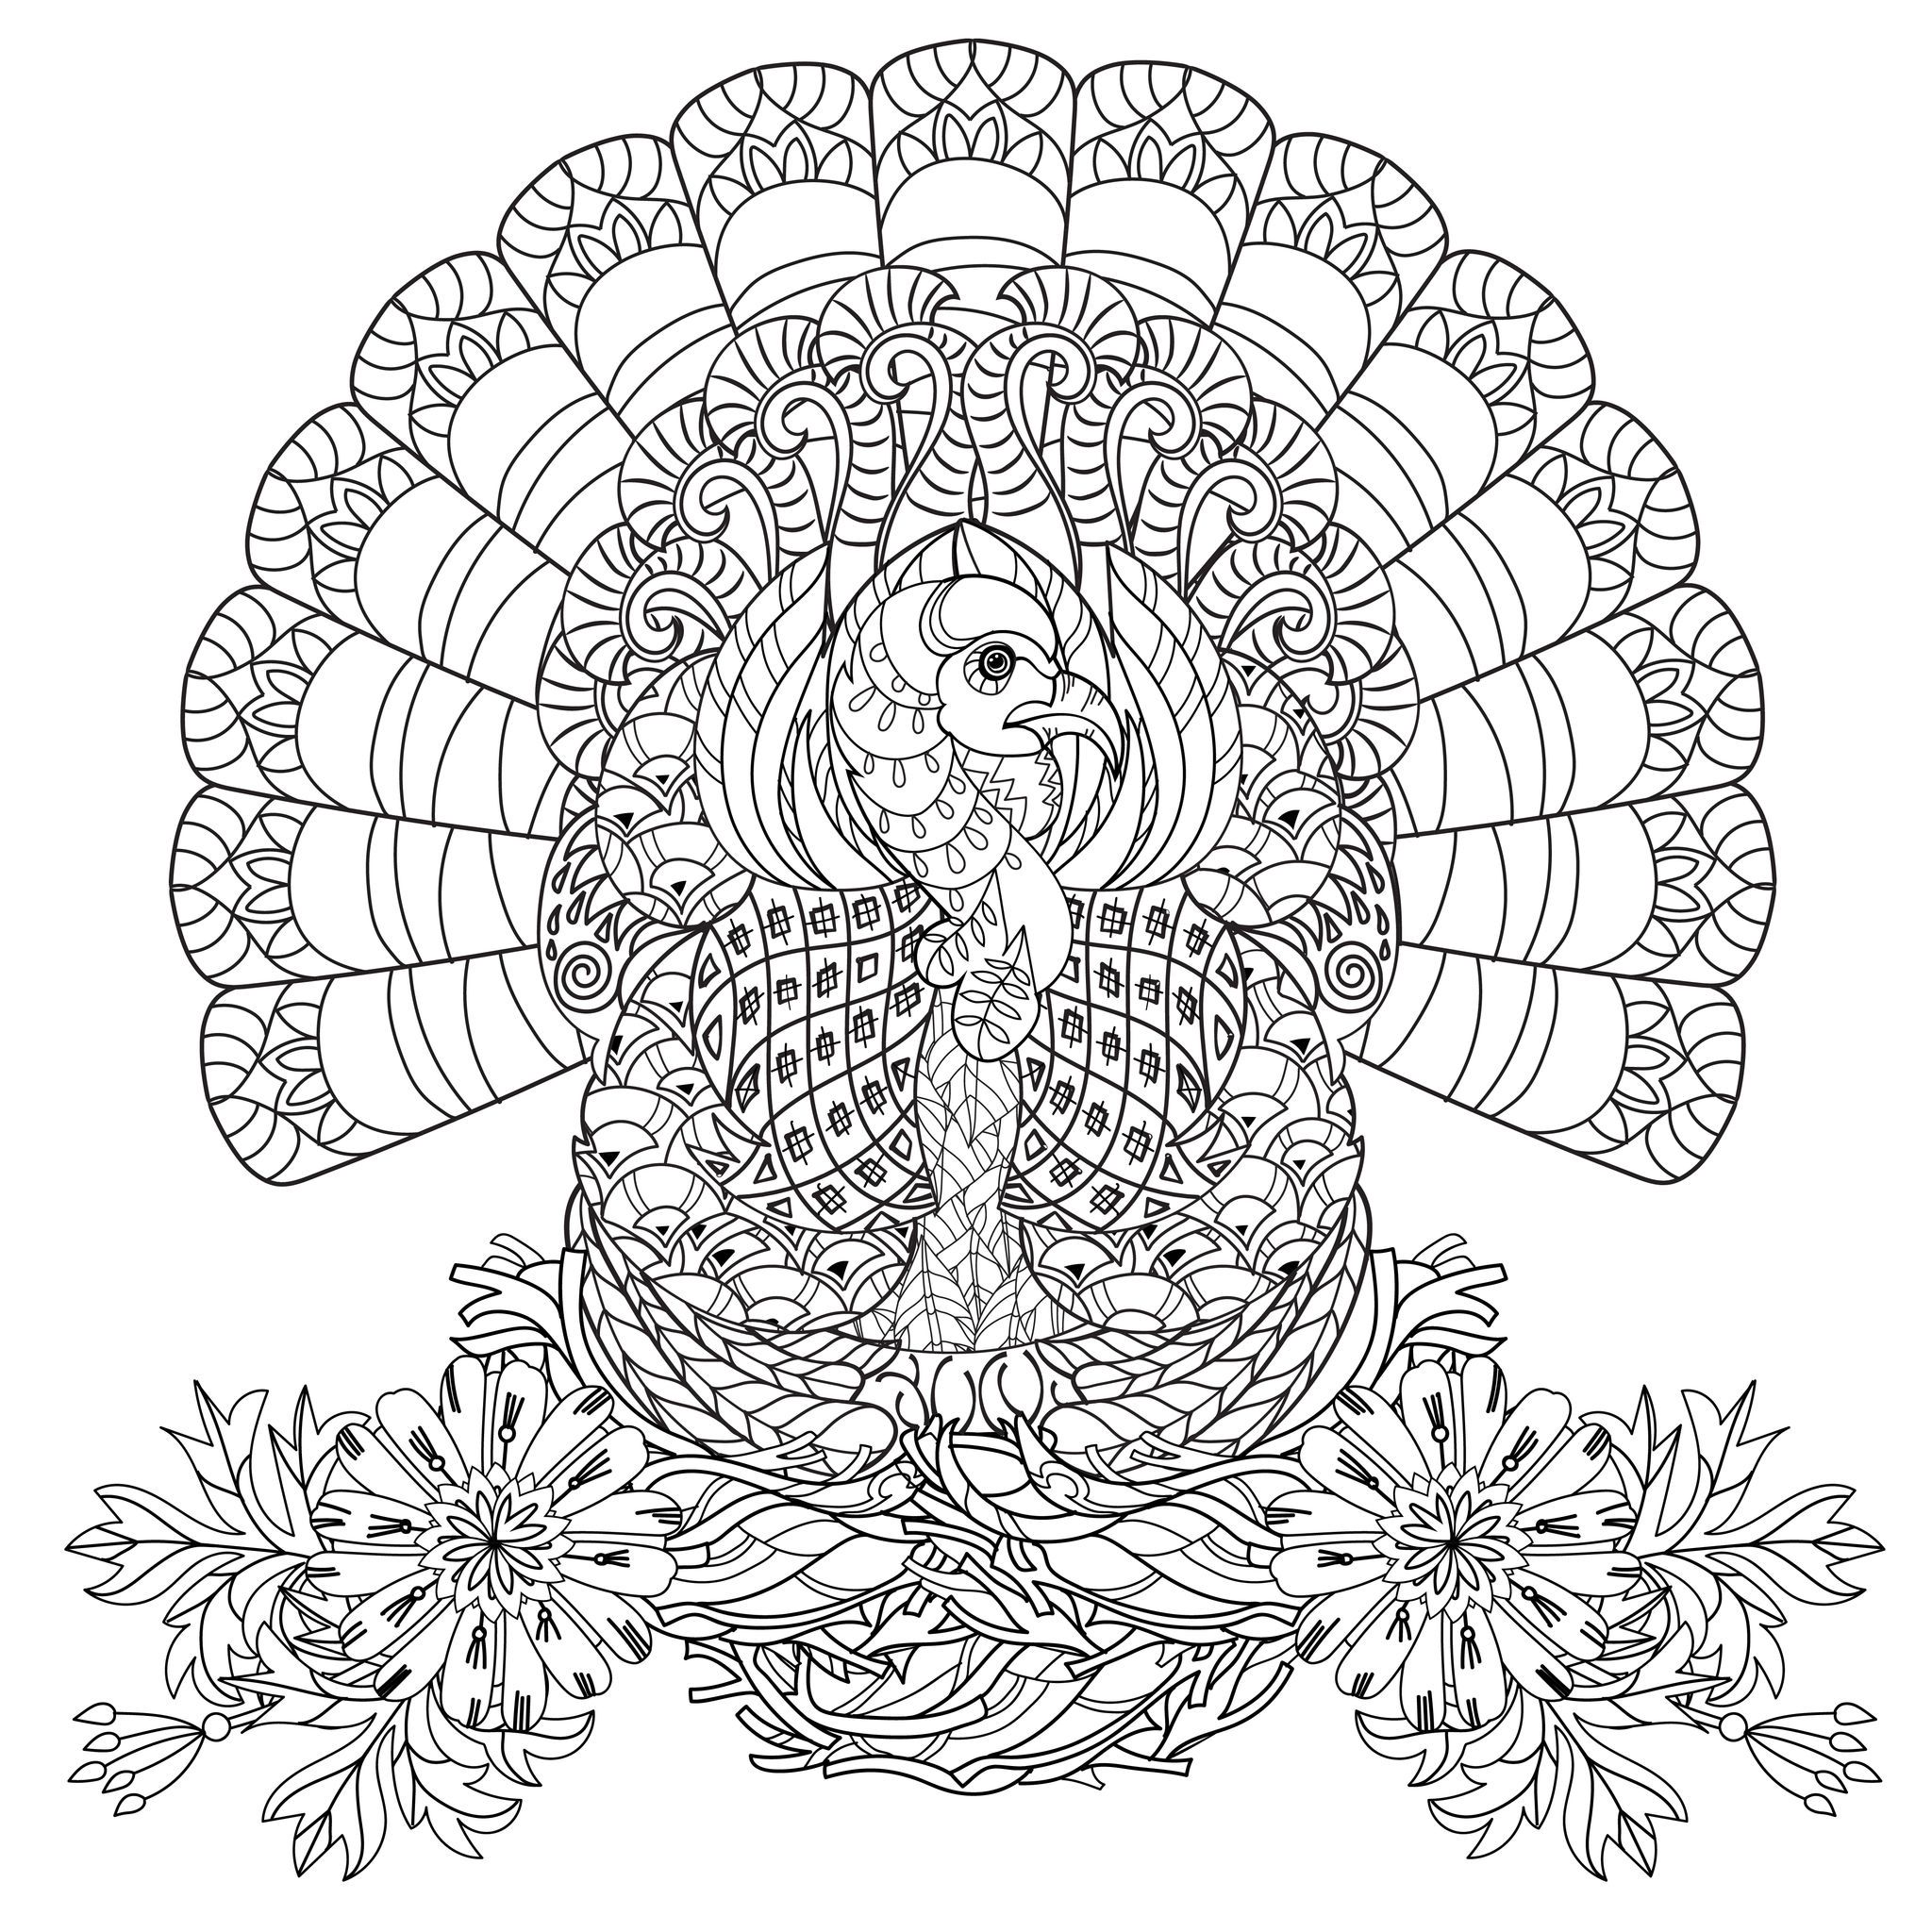 Thanksgiving Coloring Pages for adults